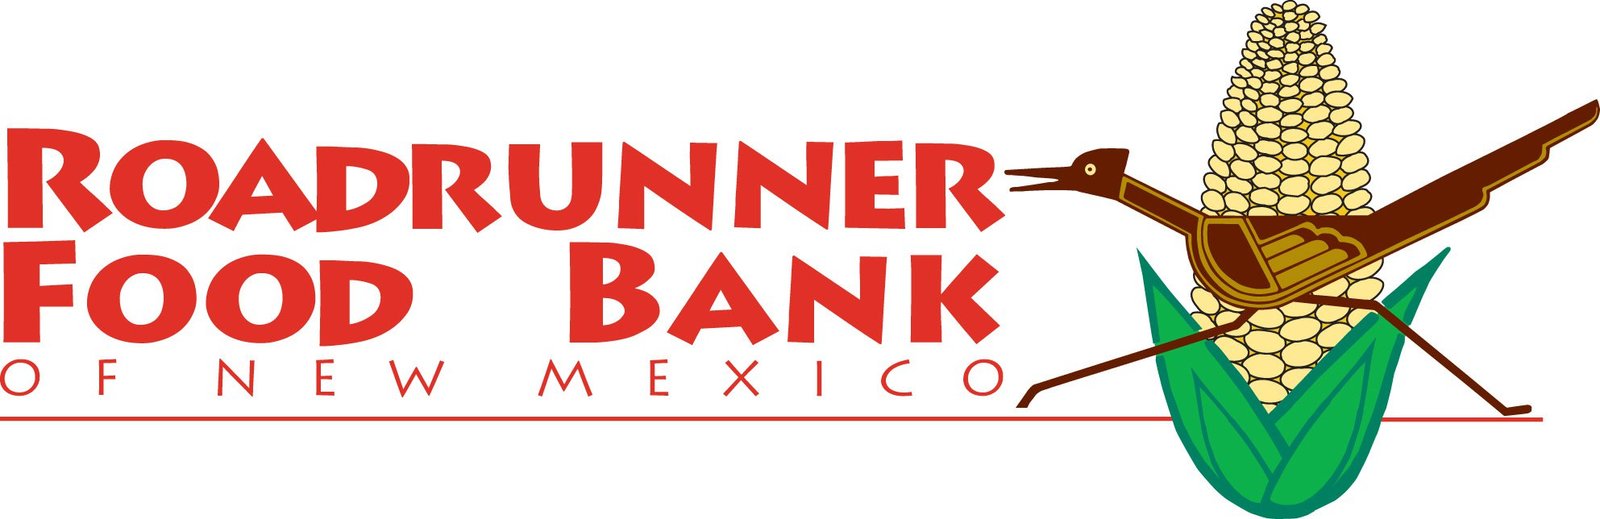 Roadrunner Food Bank of New Mexico